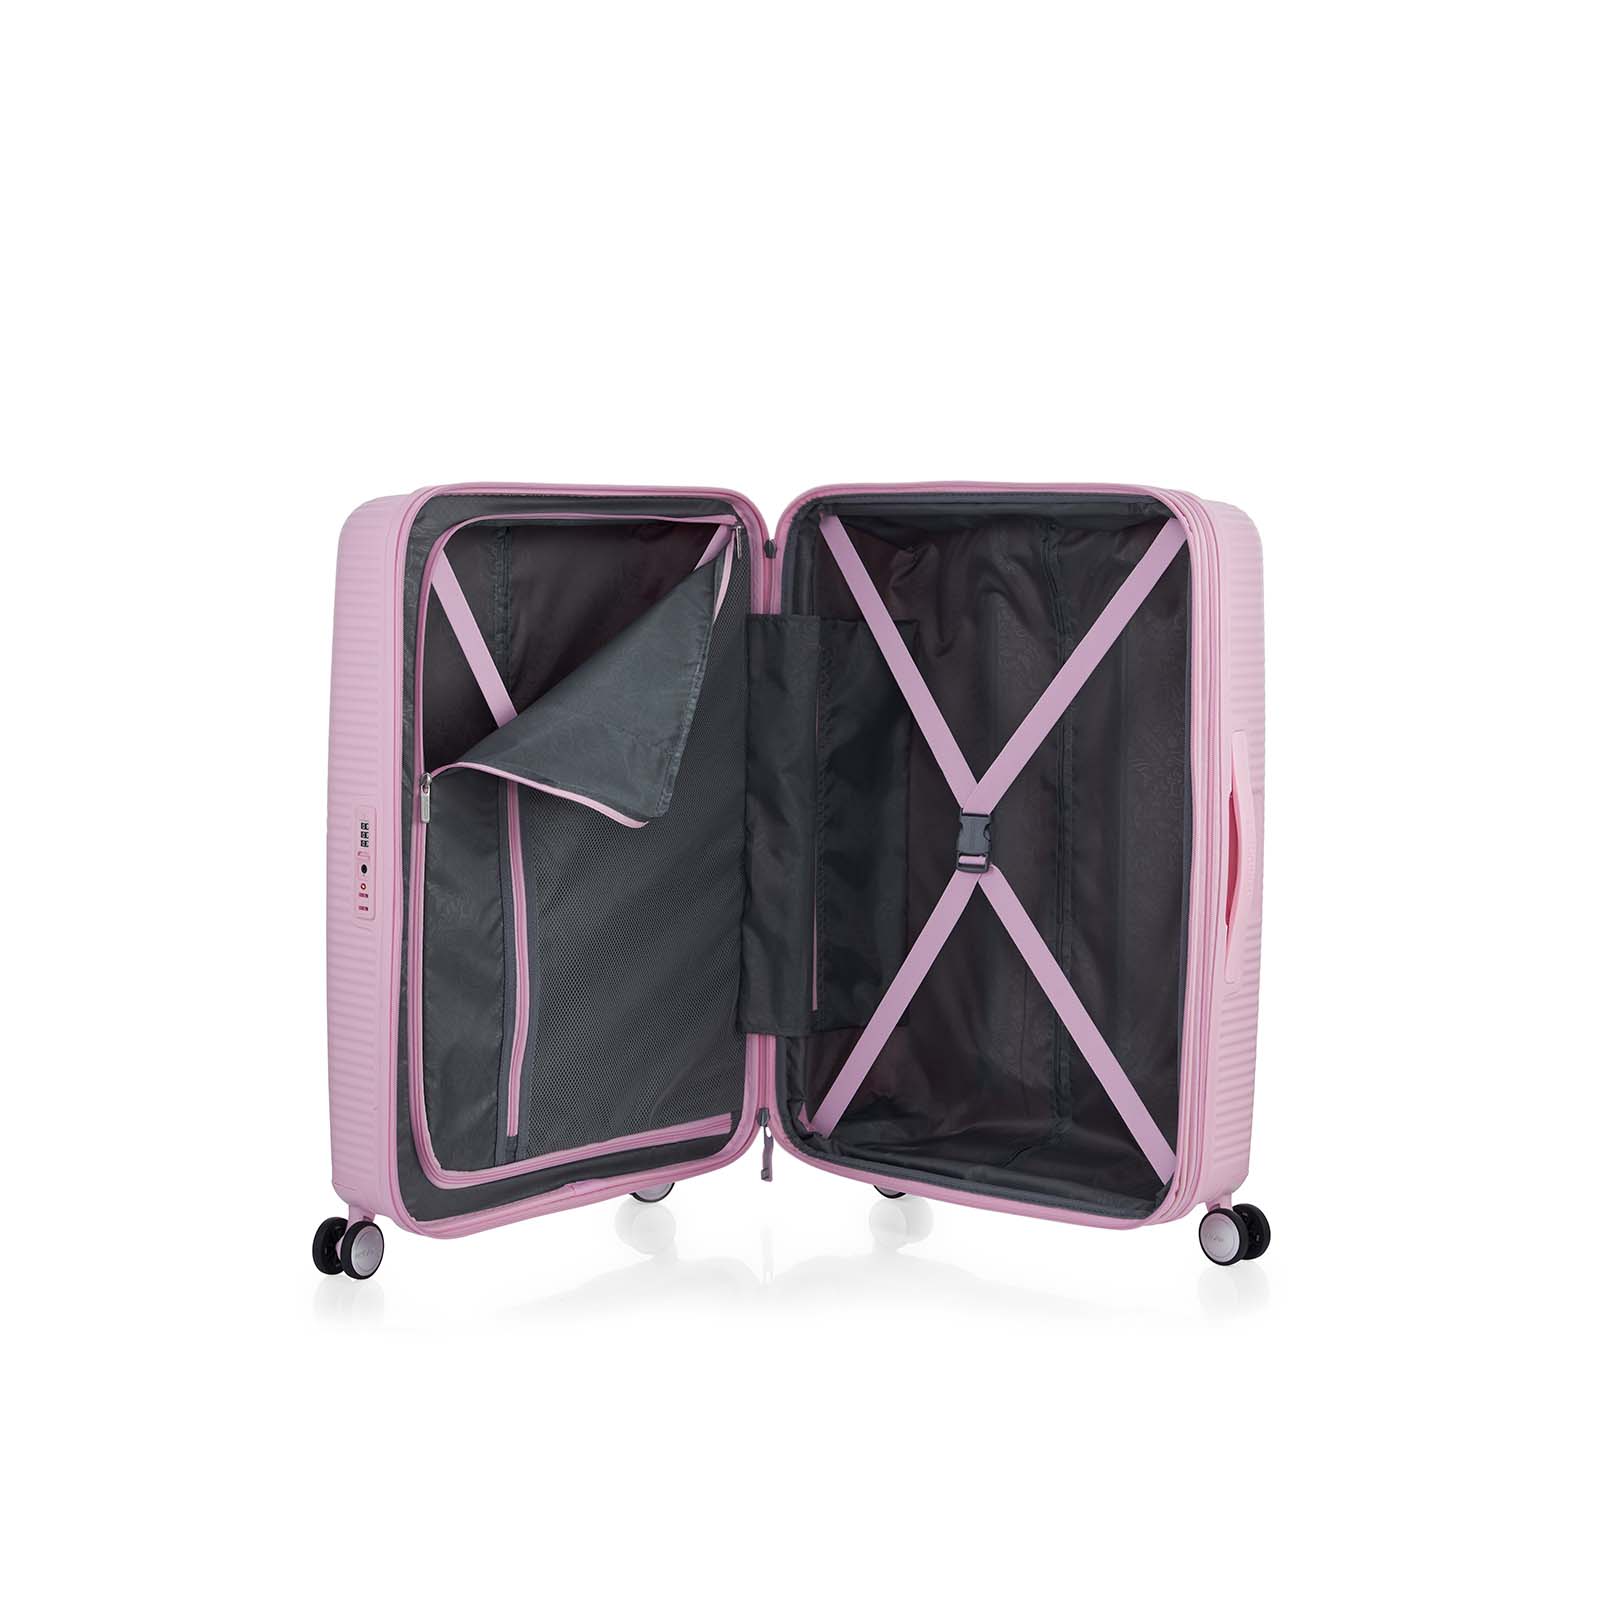 American-Tourister-Curio-2-69cm-Suitcase-Fresh-Pink-Open